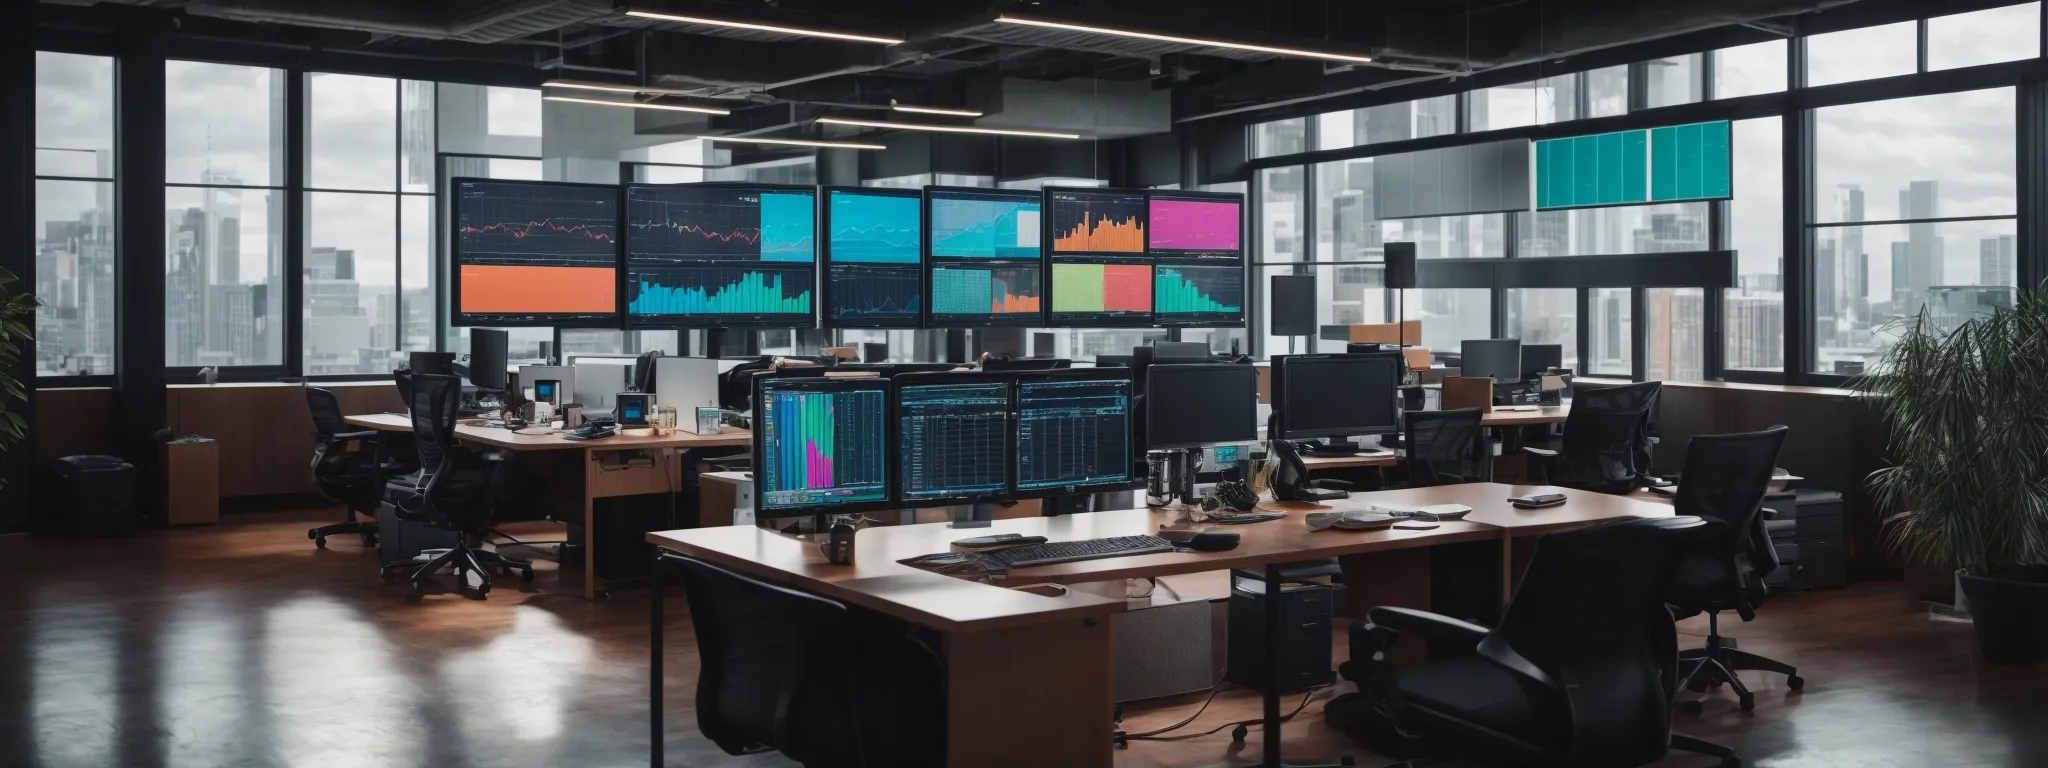 a modern office with an array of computer screens displaying colorful analytics dashboards and graphs amidst a calm business environment.